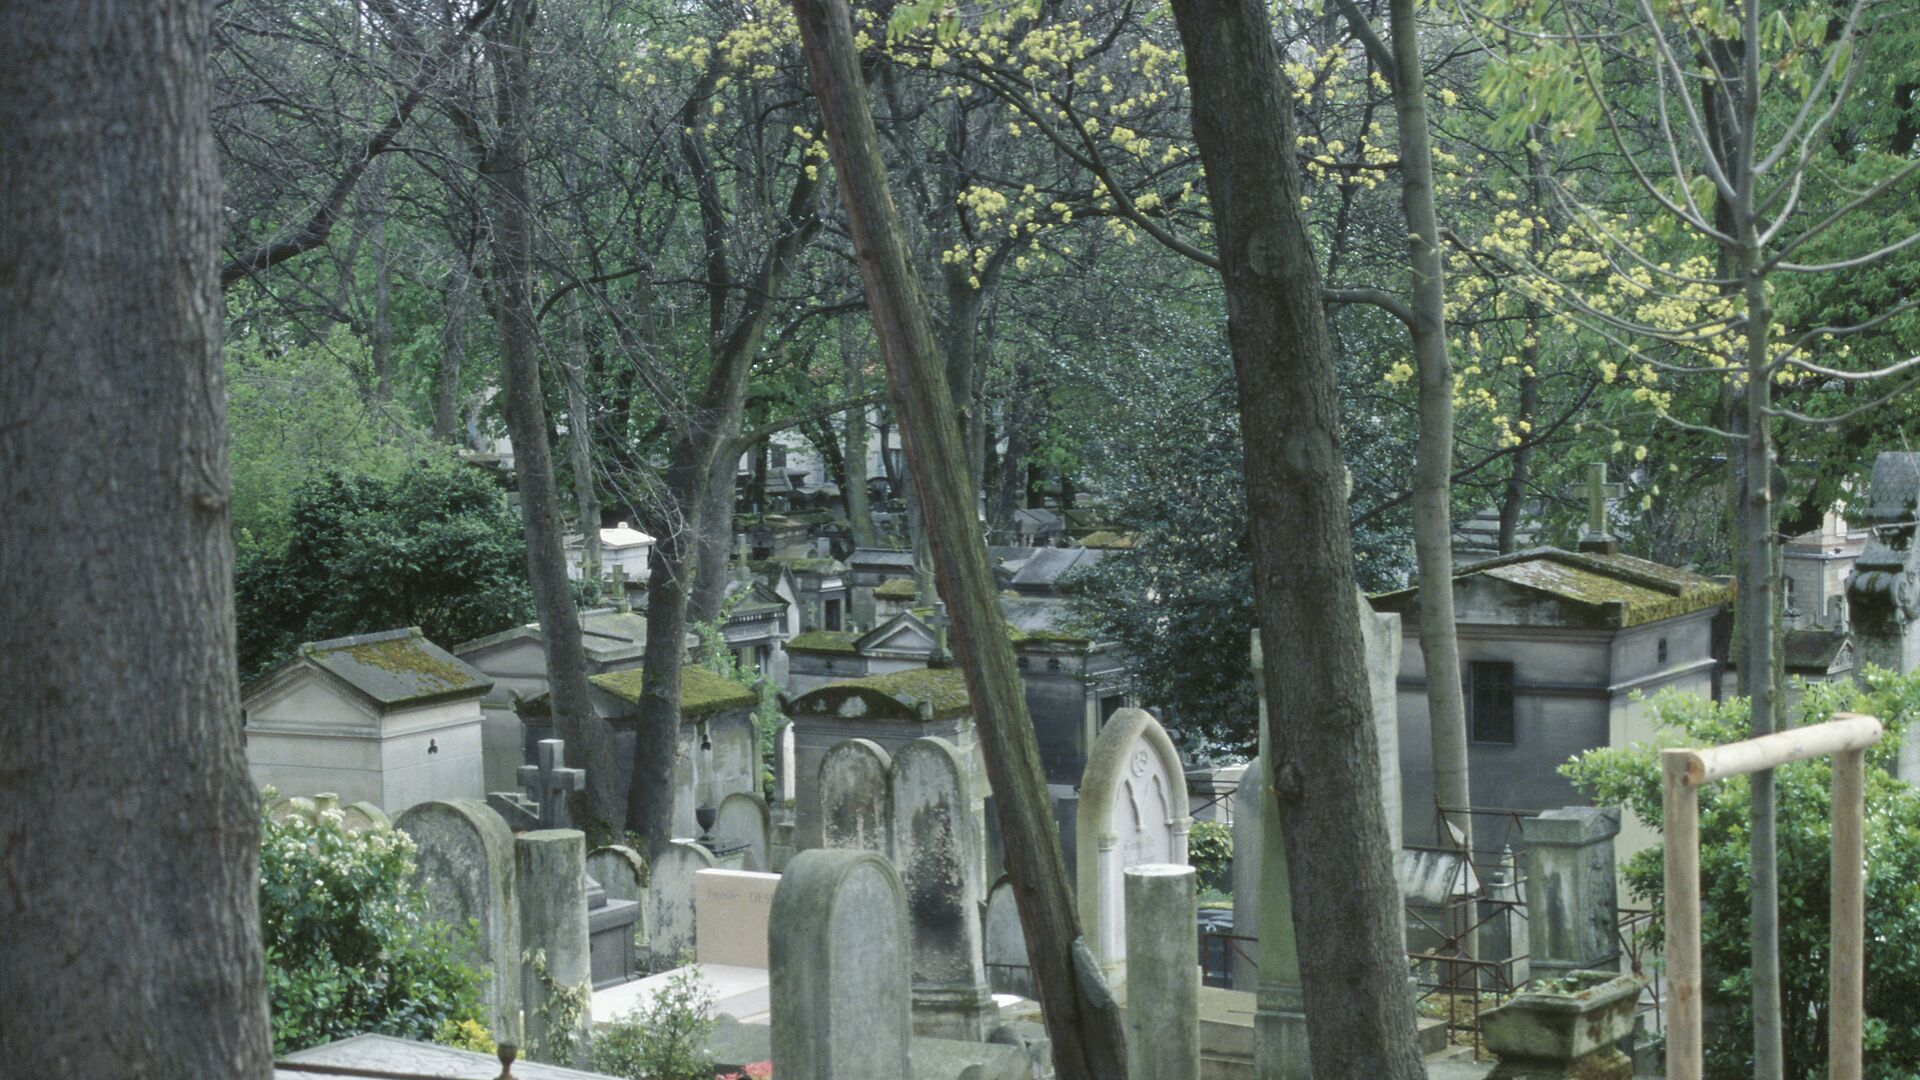 Photo of a cemetery crowded with headstones